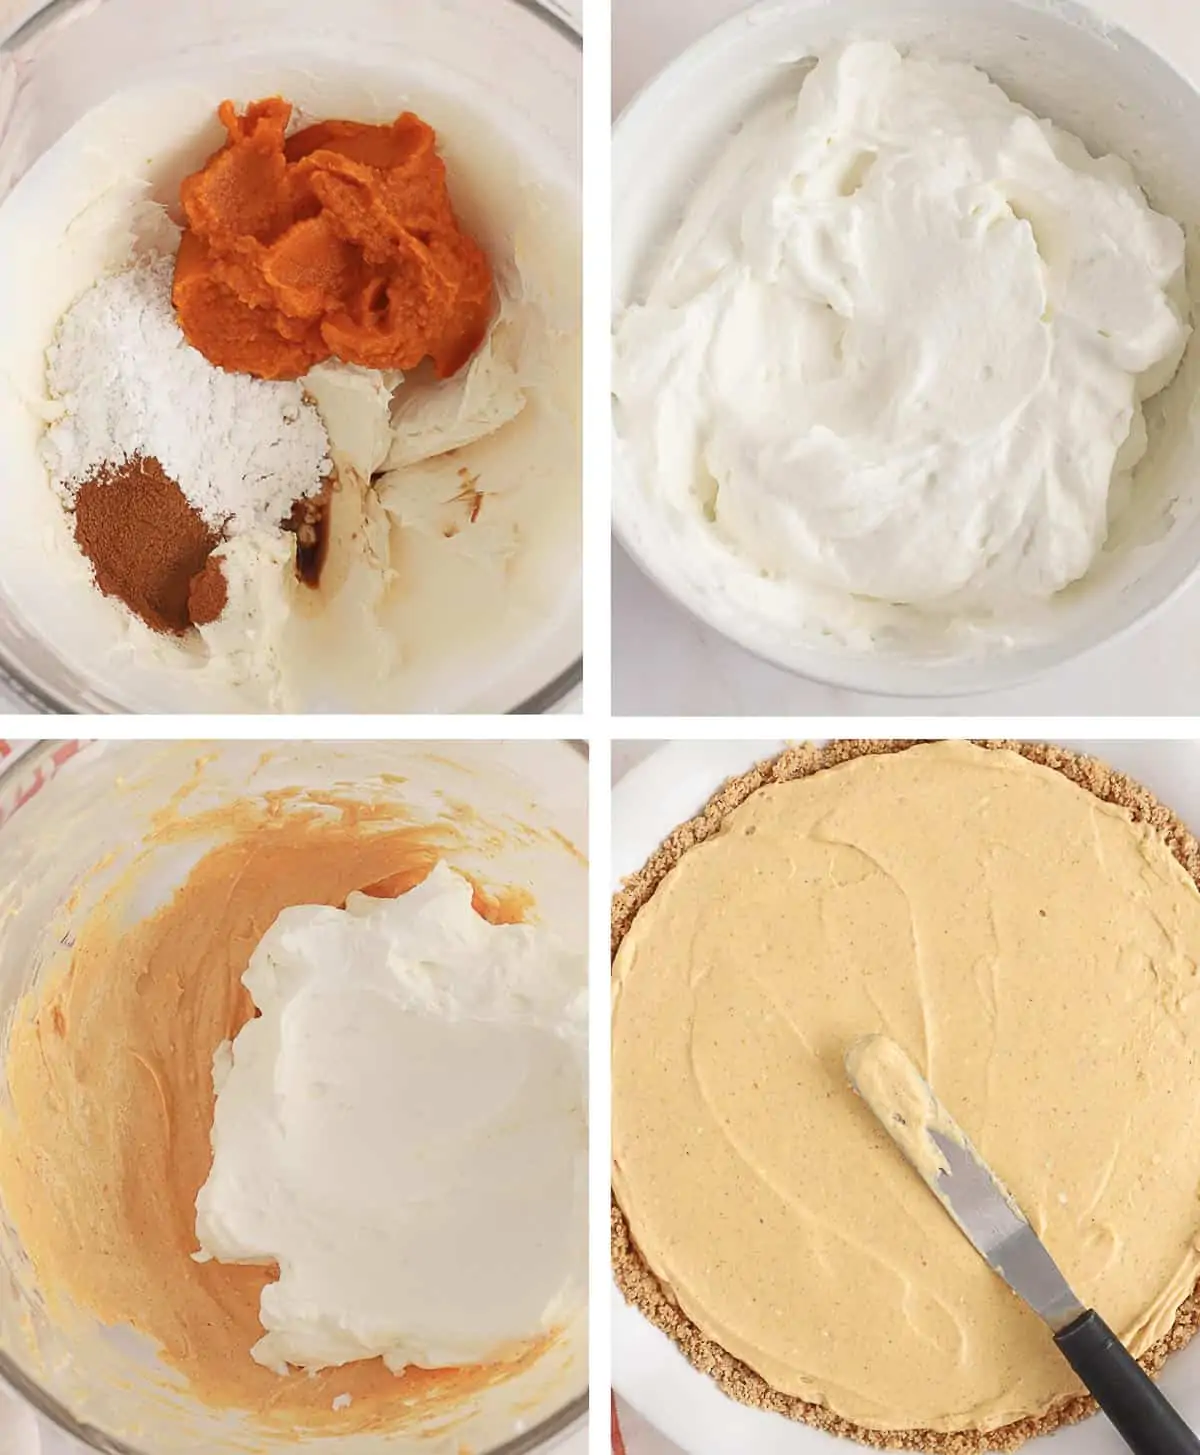 Step by step collage how to make pumpkin pie cheesecake. Pie filling in a bowl and in a graham cracker crust.